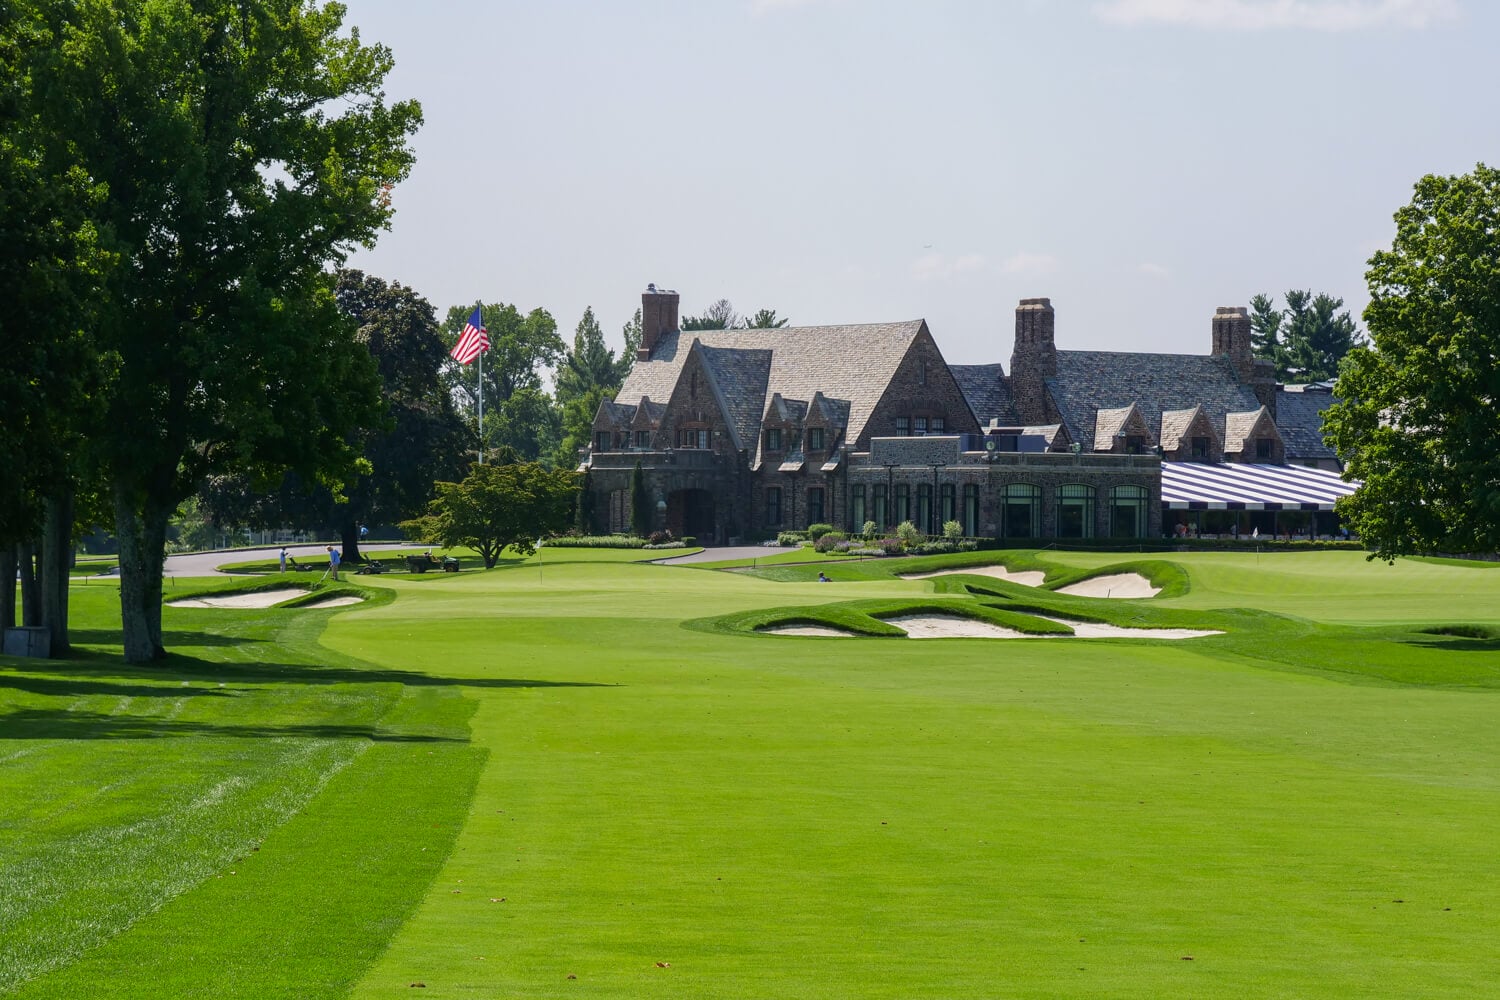 Ninth hole at Winged Foot Golf Club looking towards Clubhouse